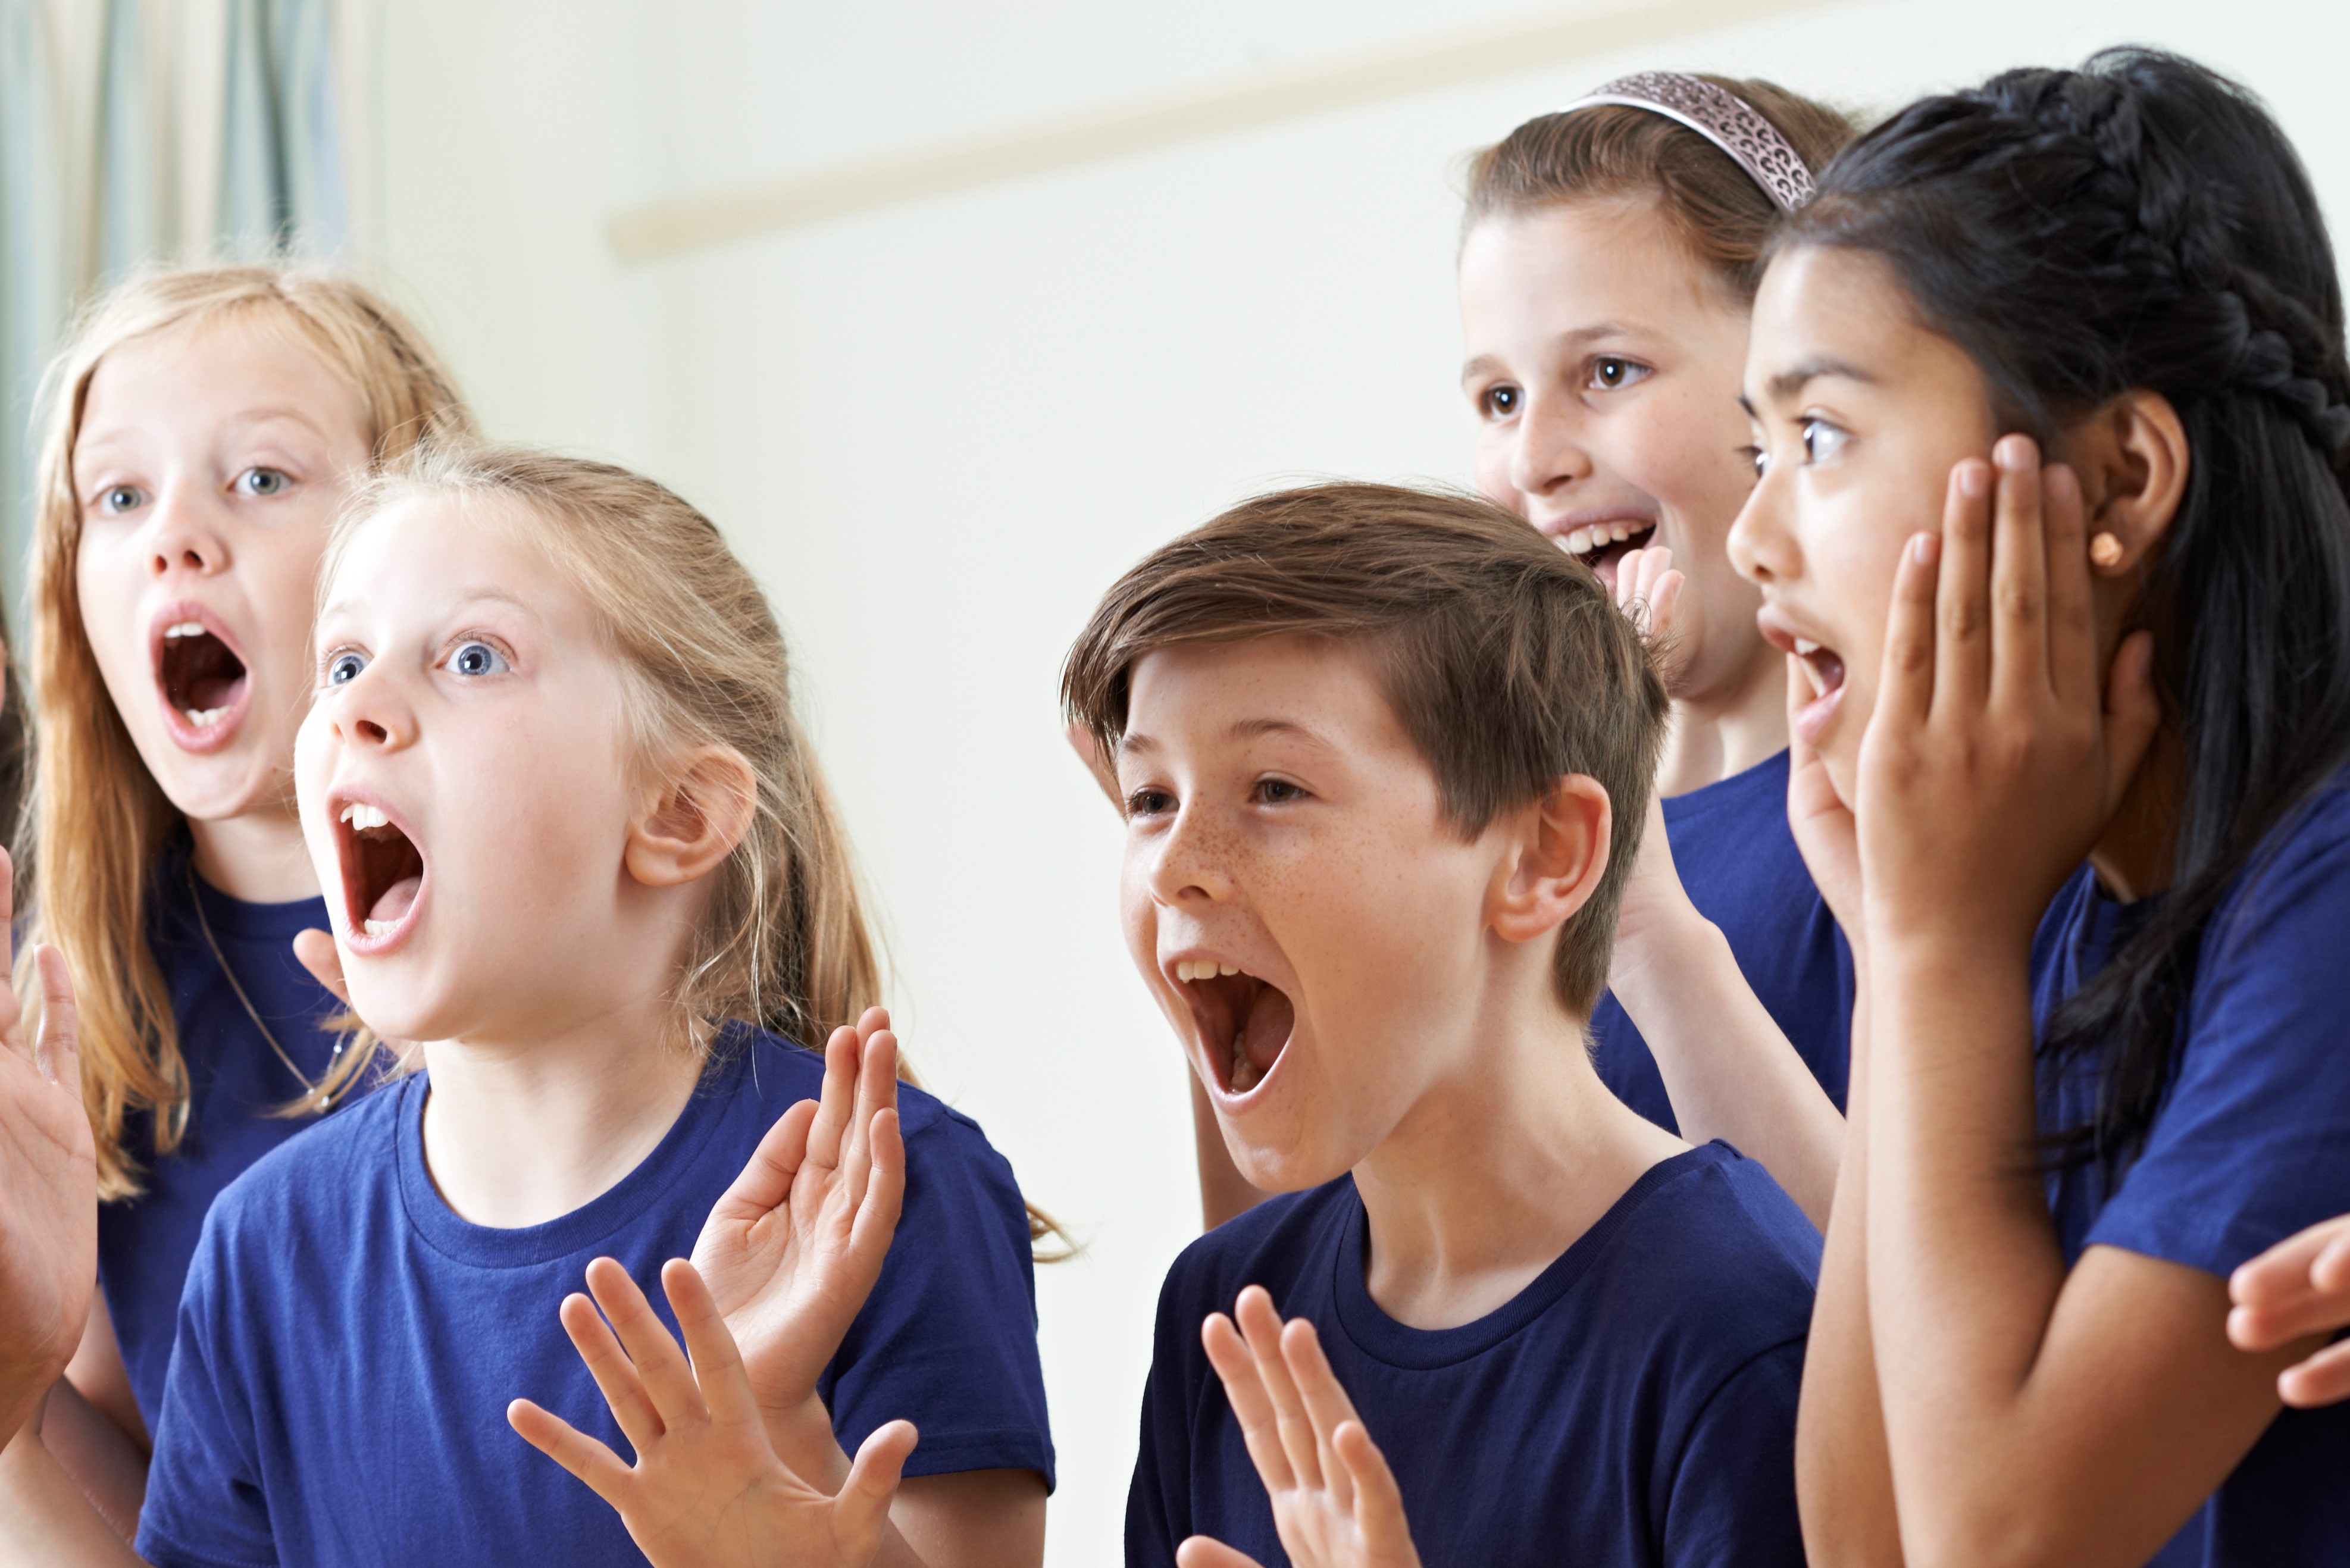 A group of 5 children in blue t-shirts looking surprised and shocked